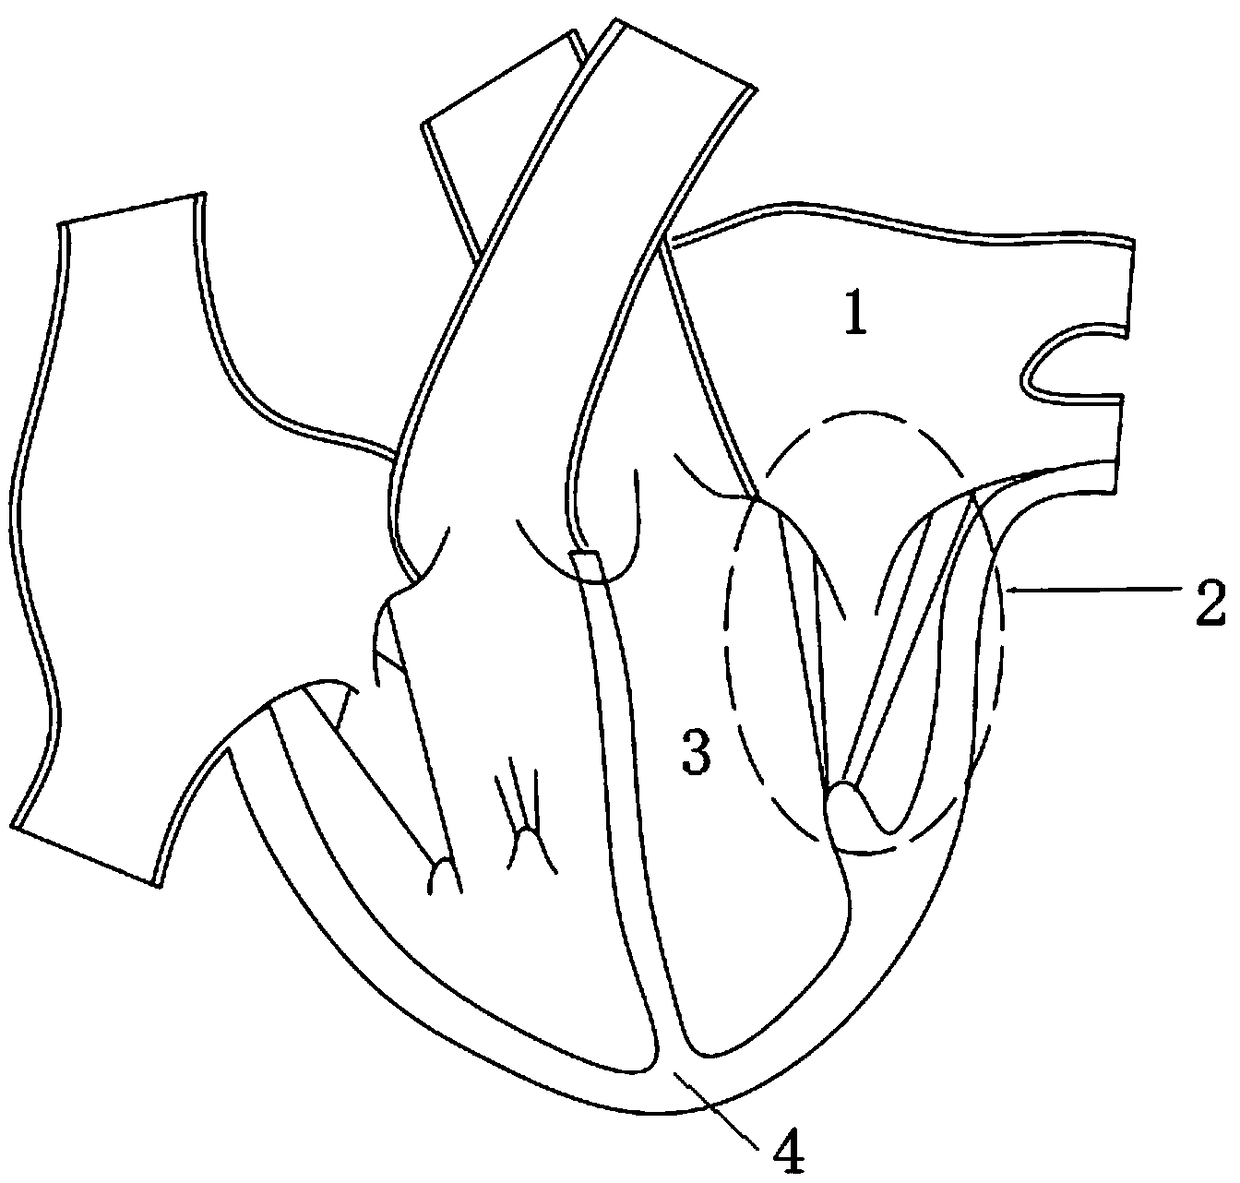 Instrument for placing mitral valve artificial tendinous cord